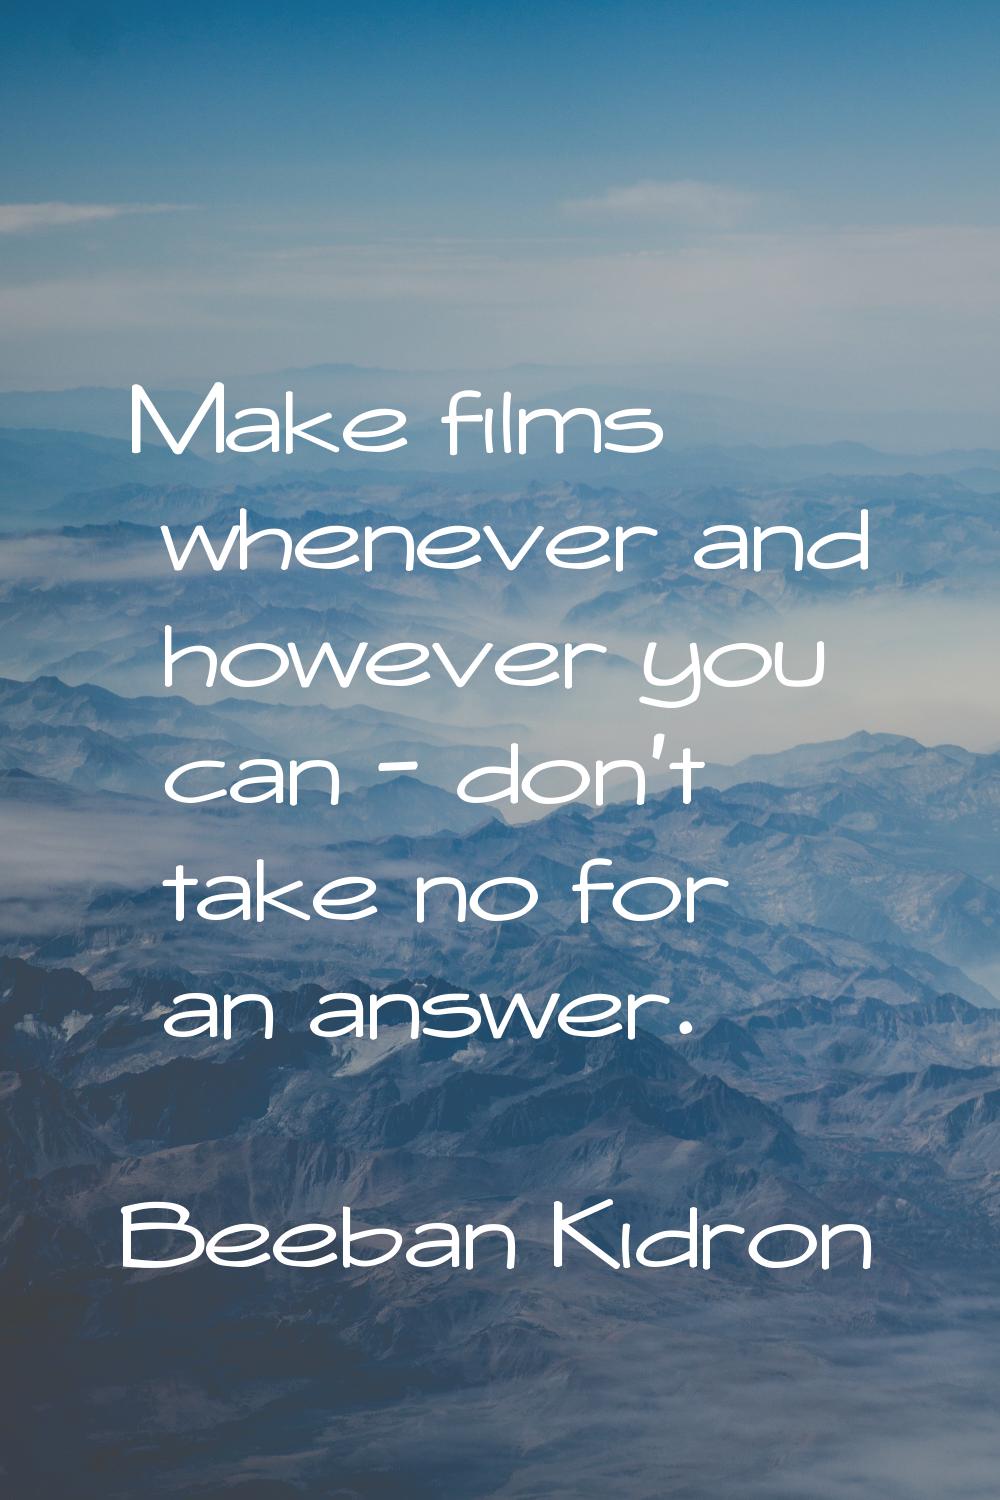 Make films whenever and however you can - don't take no for an answer.